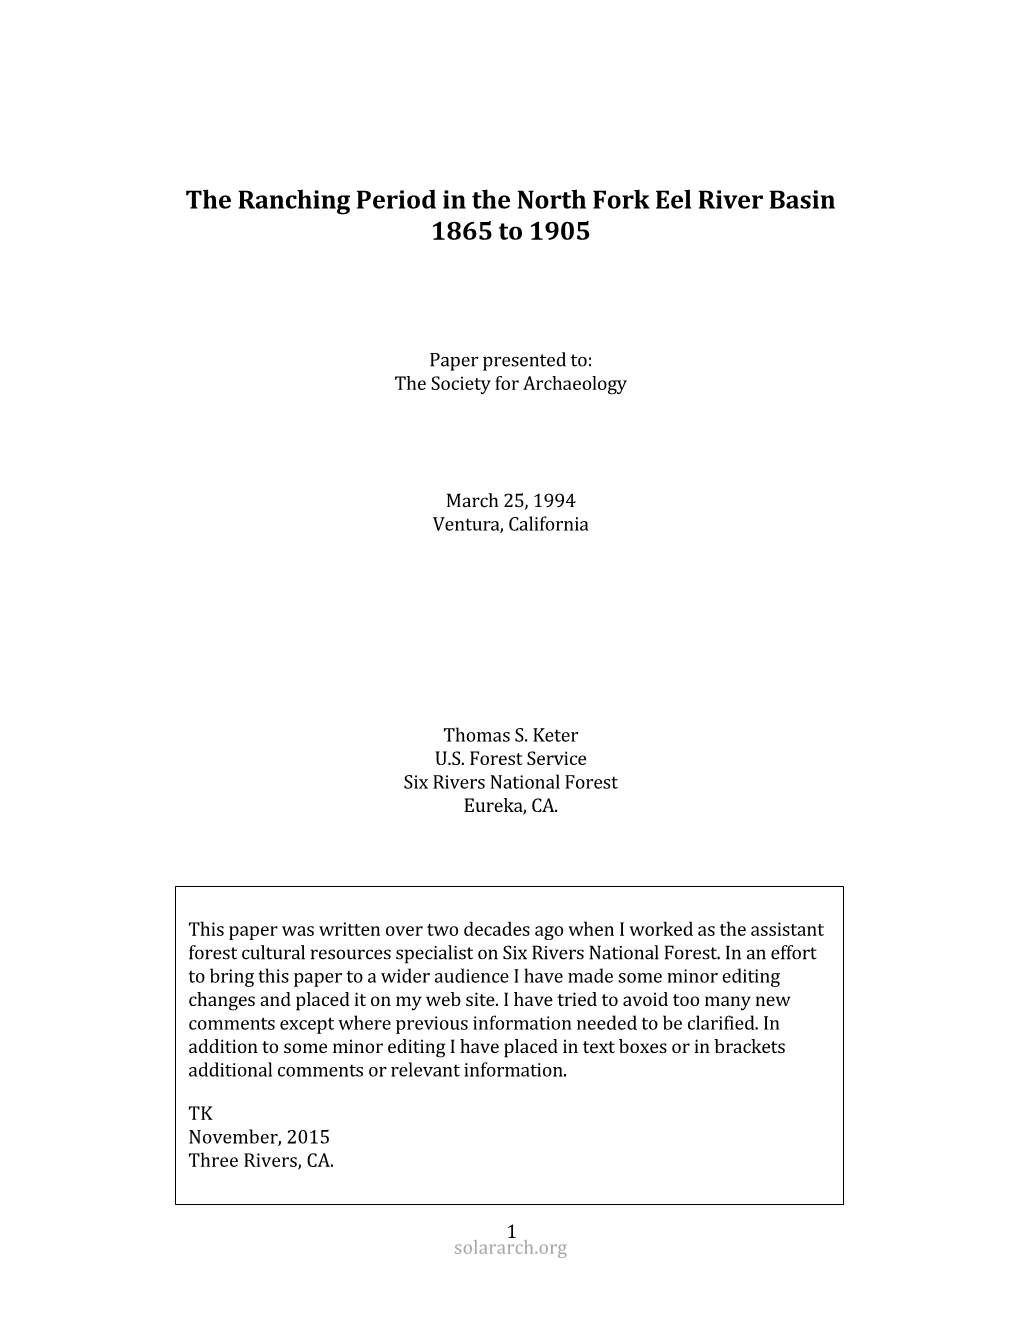 The Ranching Period in the North Fork Eel River Basin 1865 to 1905